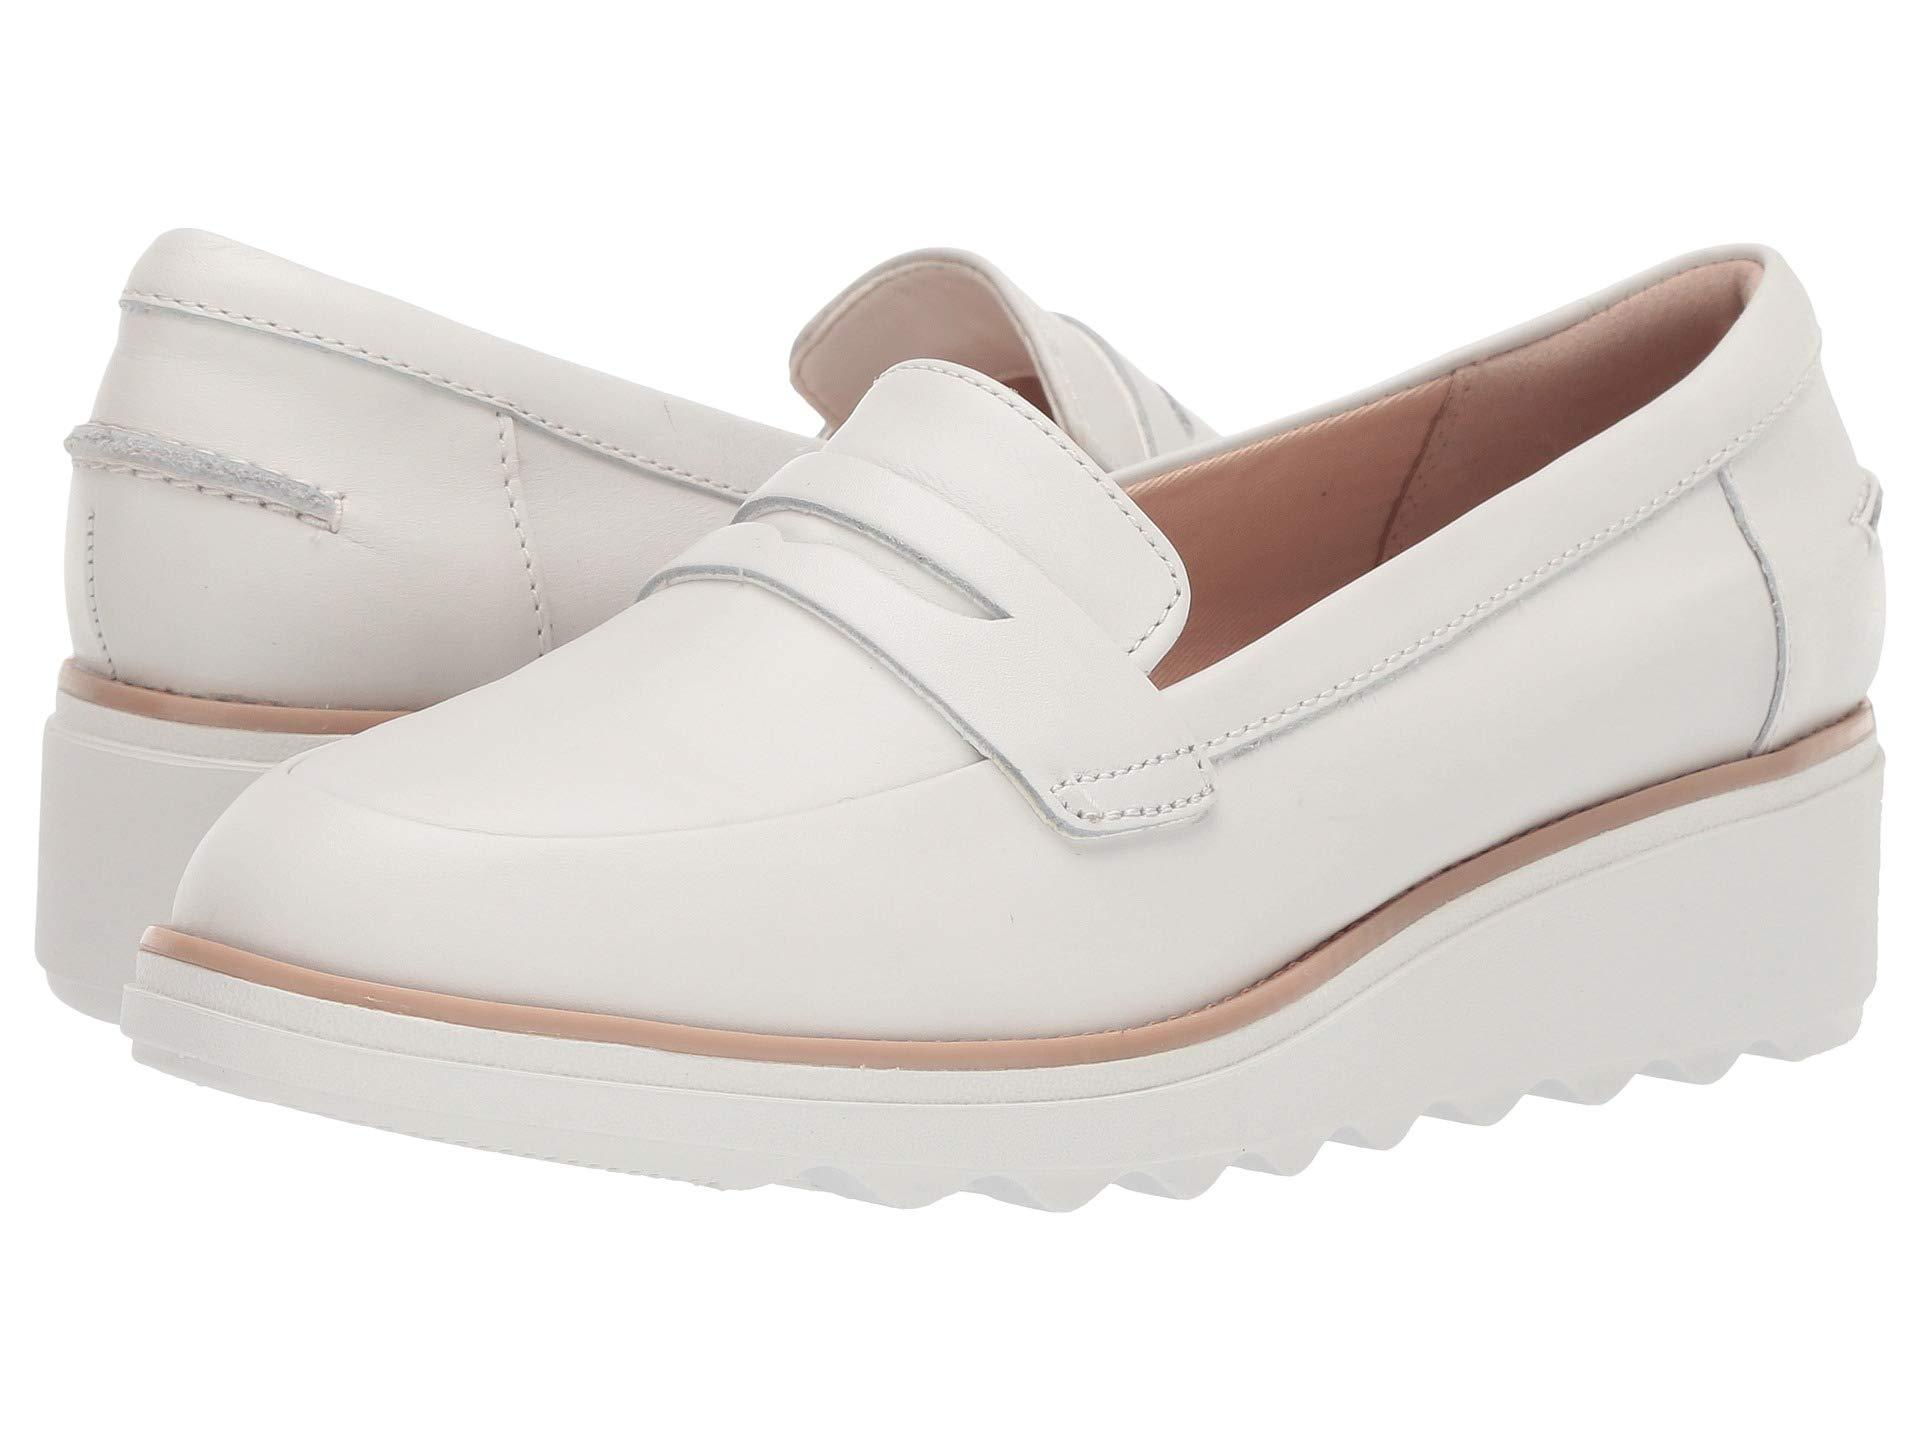 Clarks Leather Sharon Ranch Womens Wedge Heel Penny Loafers in White | Lyst